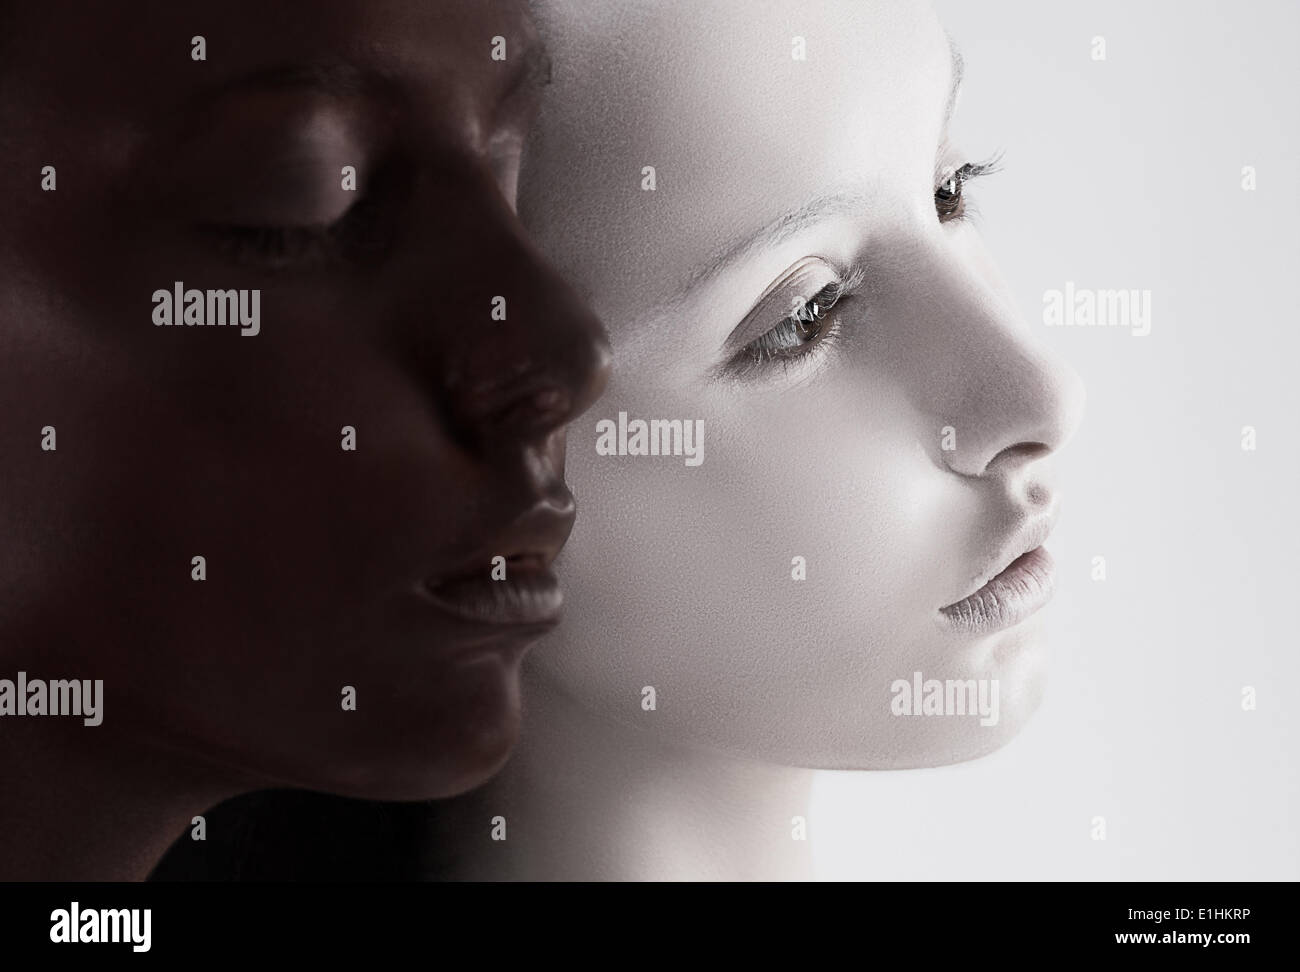 Cultural Diversity. Two Faces Colored Black & White. Yin Yang Style Stock Photo